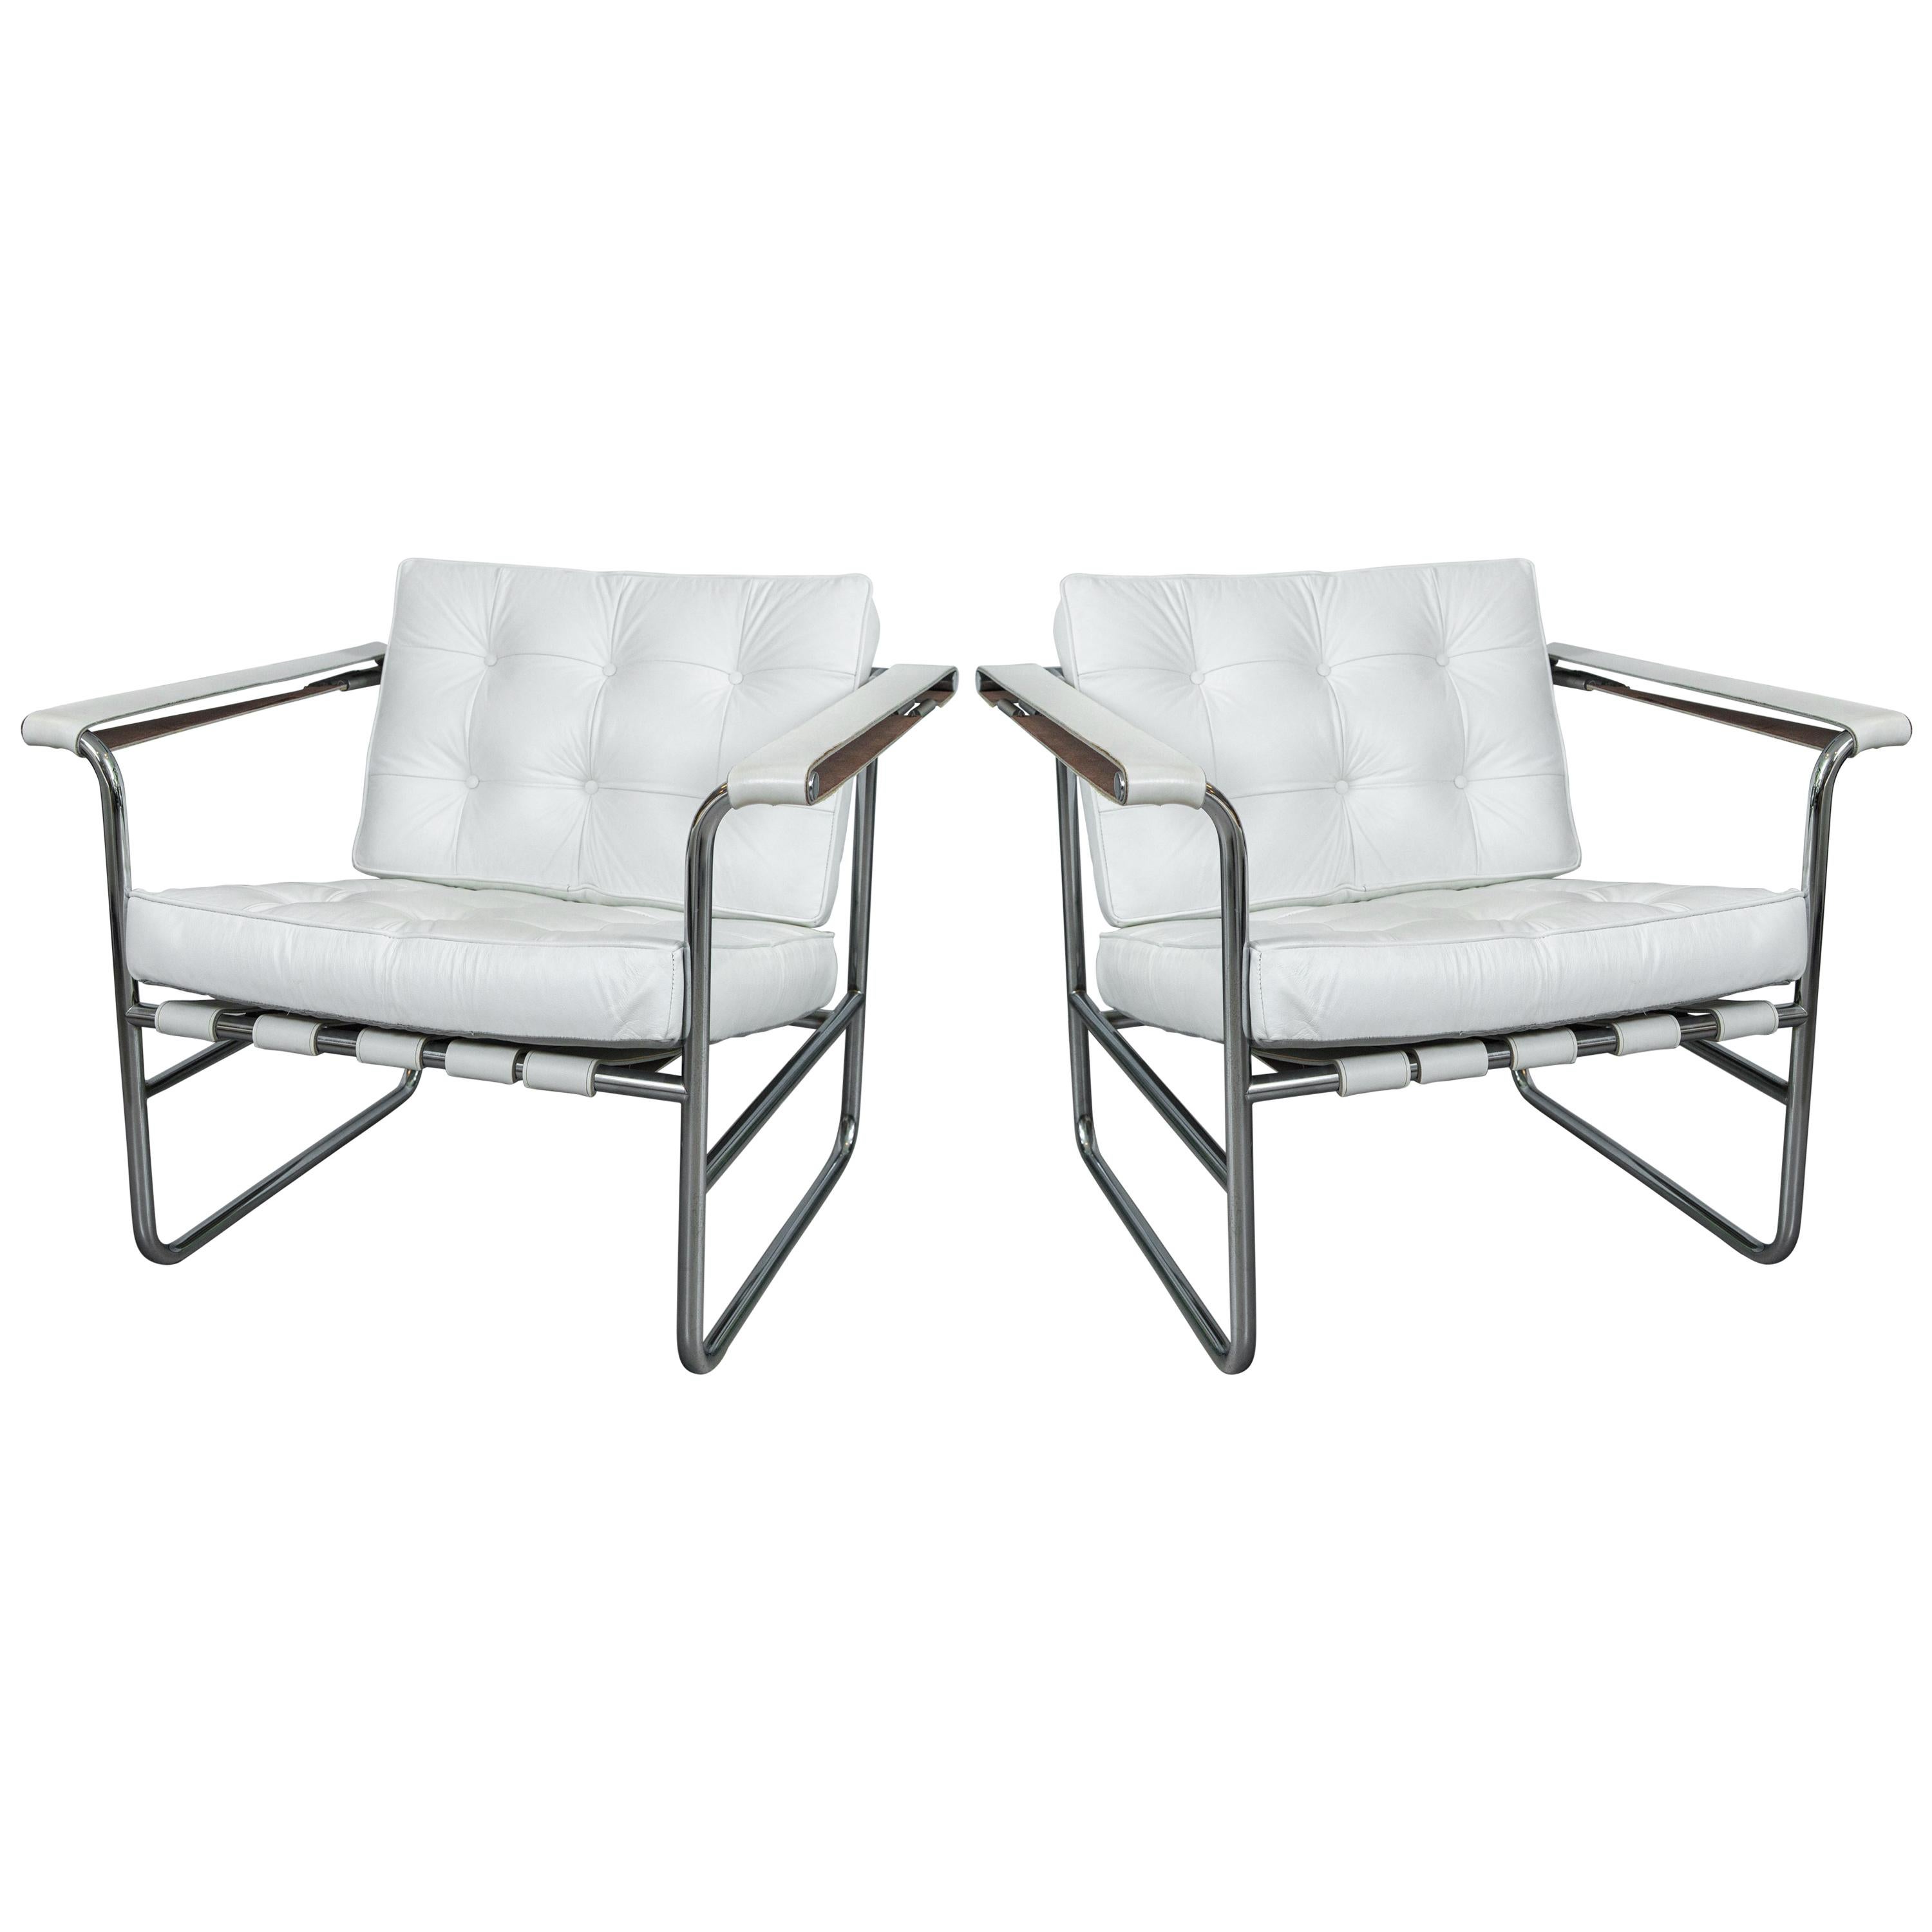 Pair of White Leather Stendig Chrome Tubular Steel Chairs